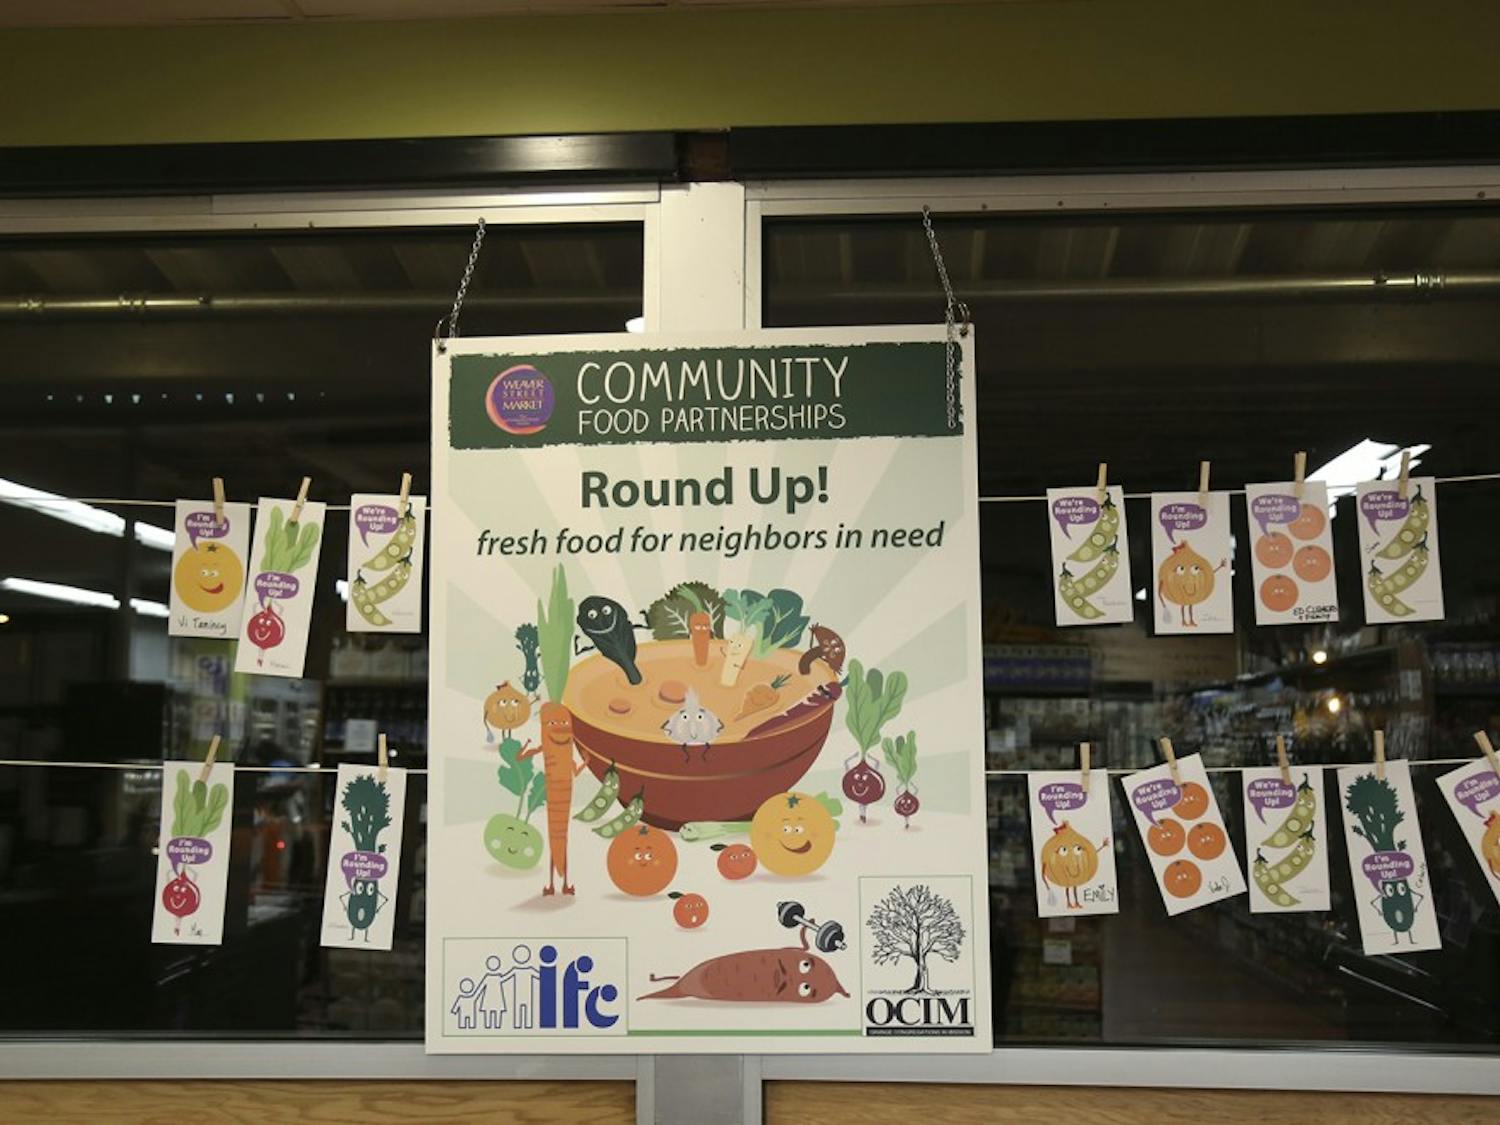 The Weaver Street Market does a Round Up Campaign which asks their customers to round up their purchases to the nearest dollar to donate.  Their first campaign happens on Wednesday, November 30 through Tuesday, January 3.